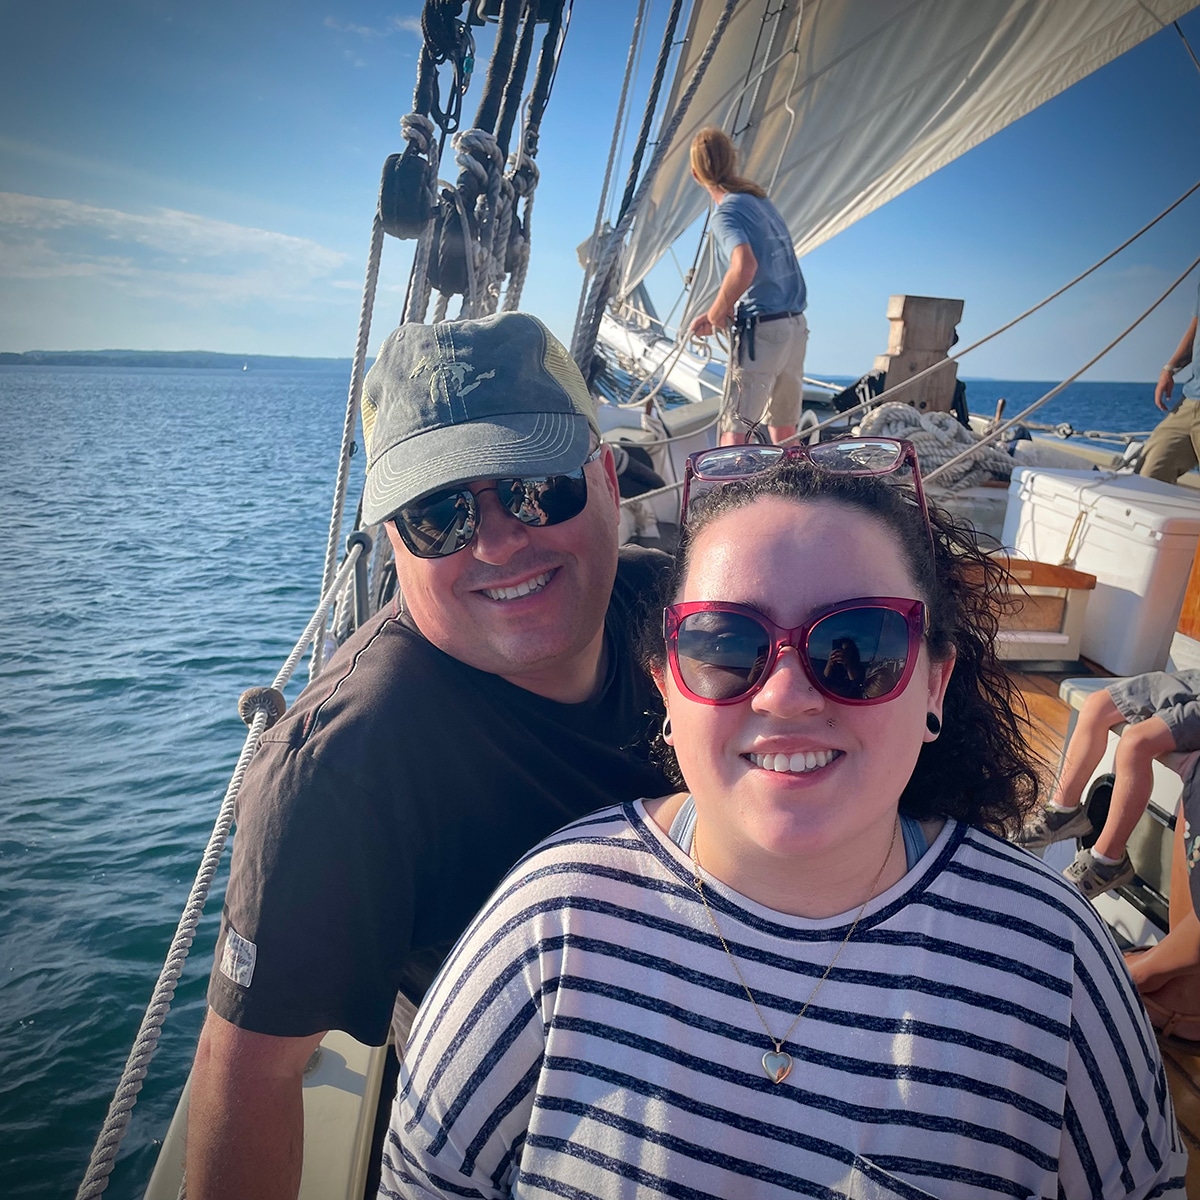 Steve and our daughter Kate abroad the Tall Ship Manitou sailing in Traverse Bay, Michigan.